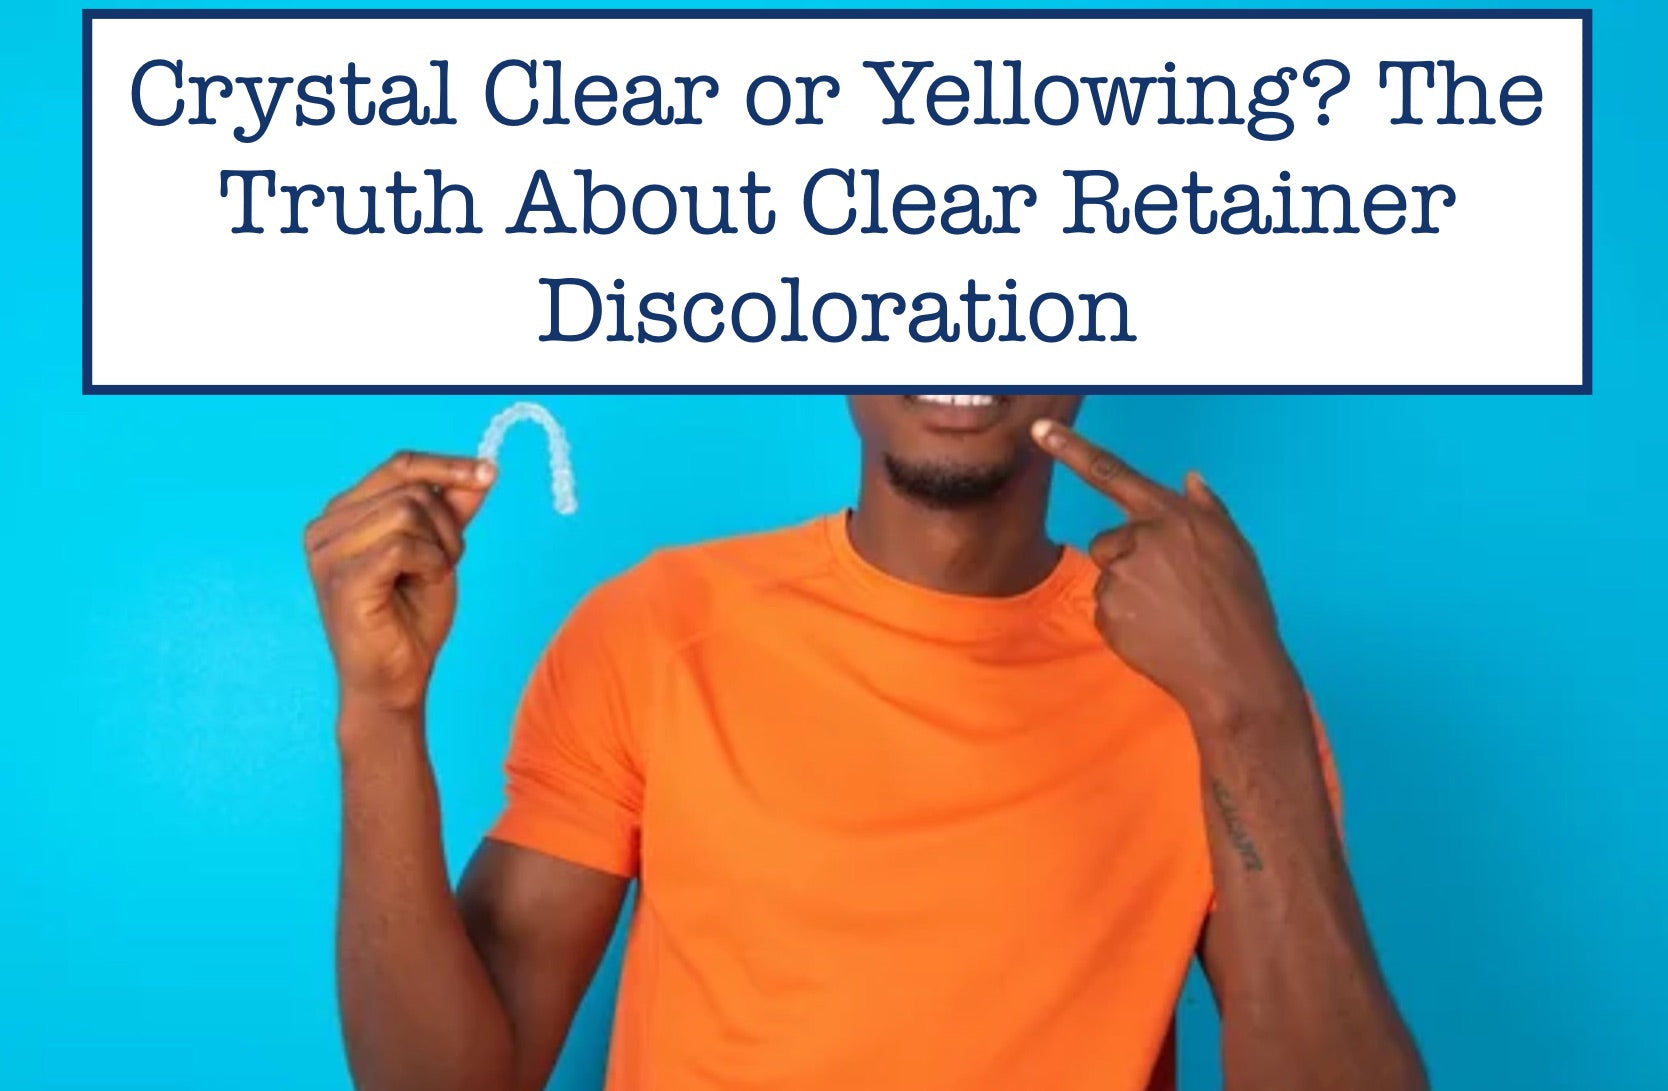 Crystal Clear or Yellowing? The Truth About Clear Retainer Discoloration